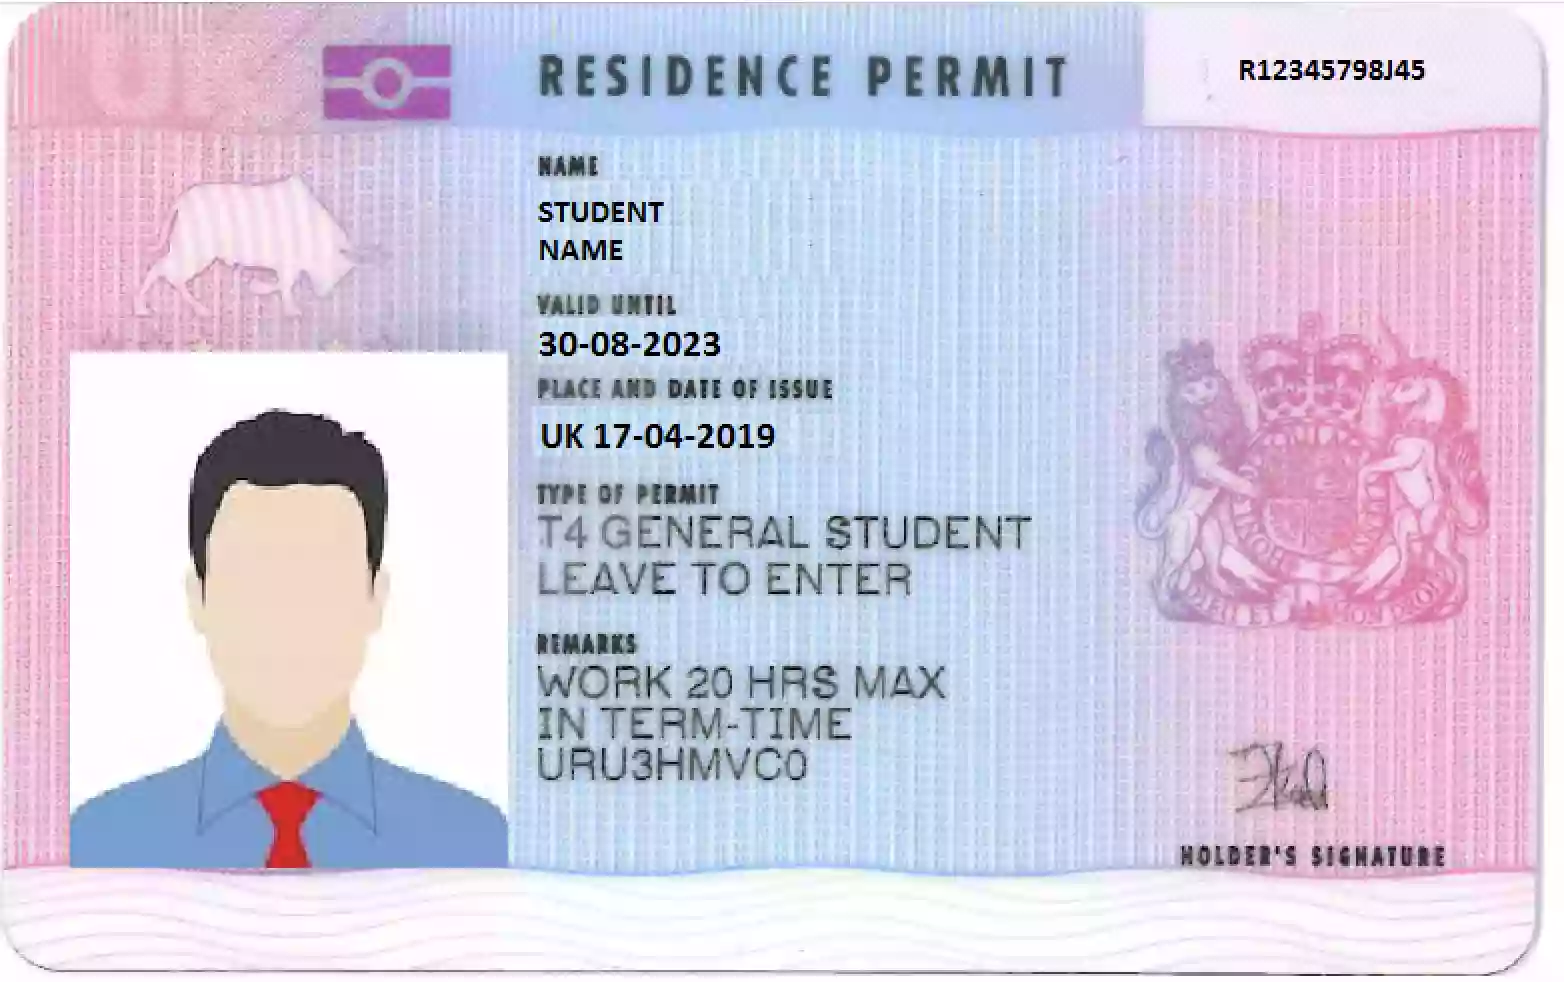 Residence permit in Spain. Discover all the benefits